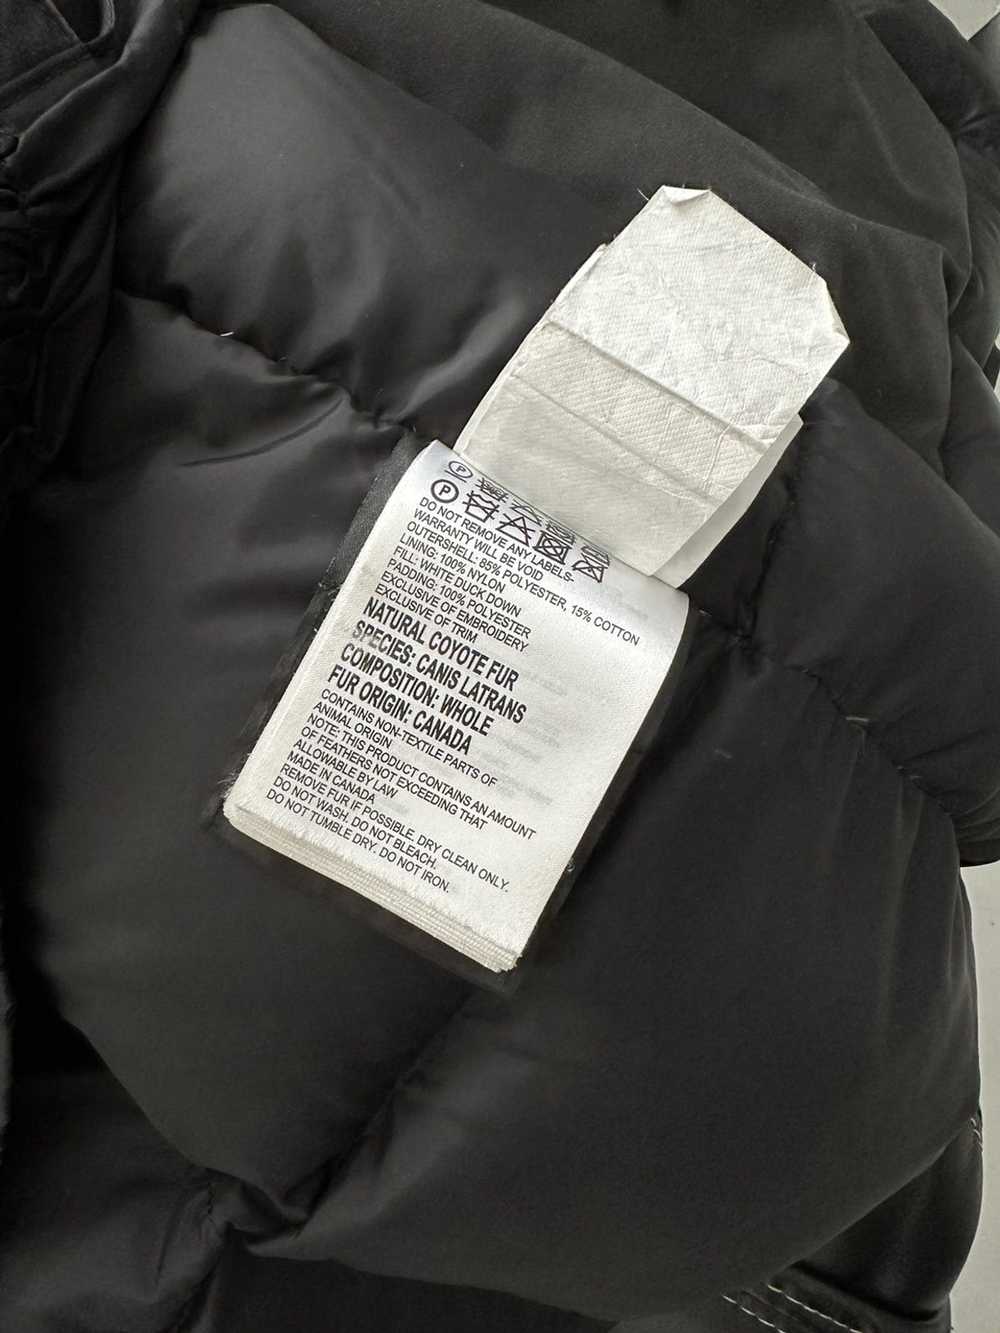 Canada Goose Expedition Parka - image 11